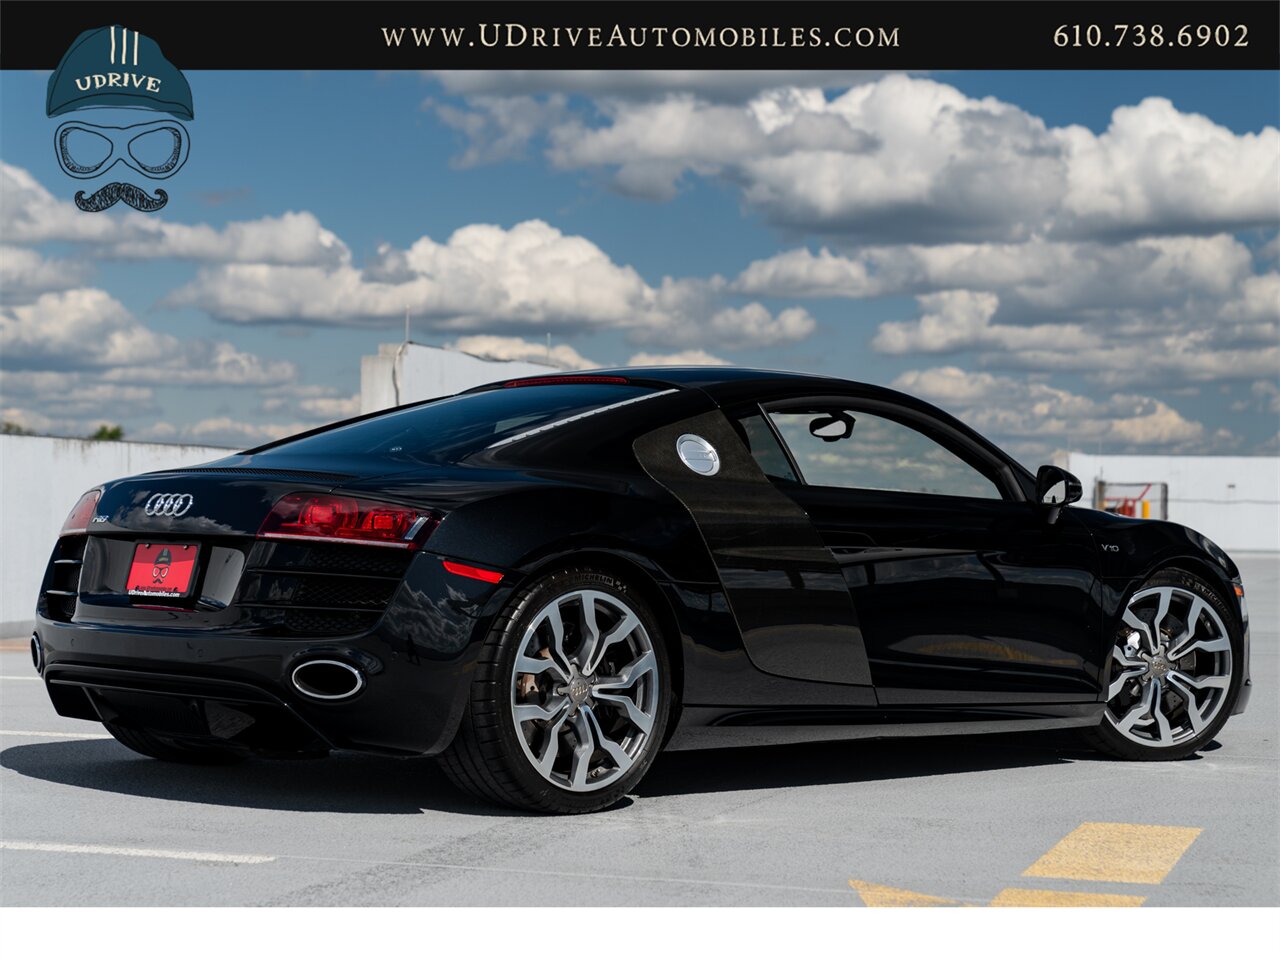 2011 Audi R8 5.2 Quattro  V10 6 Speed Manual - Photo 2 - West Chester, PA 19382